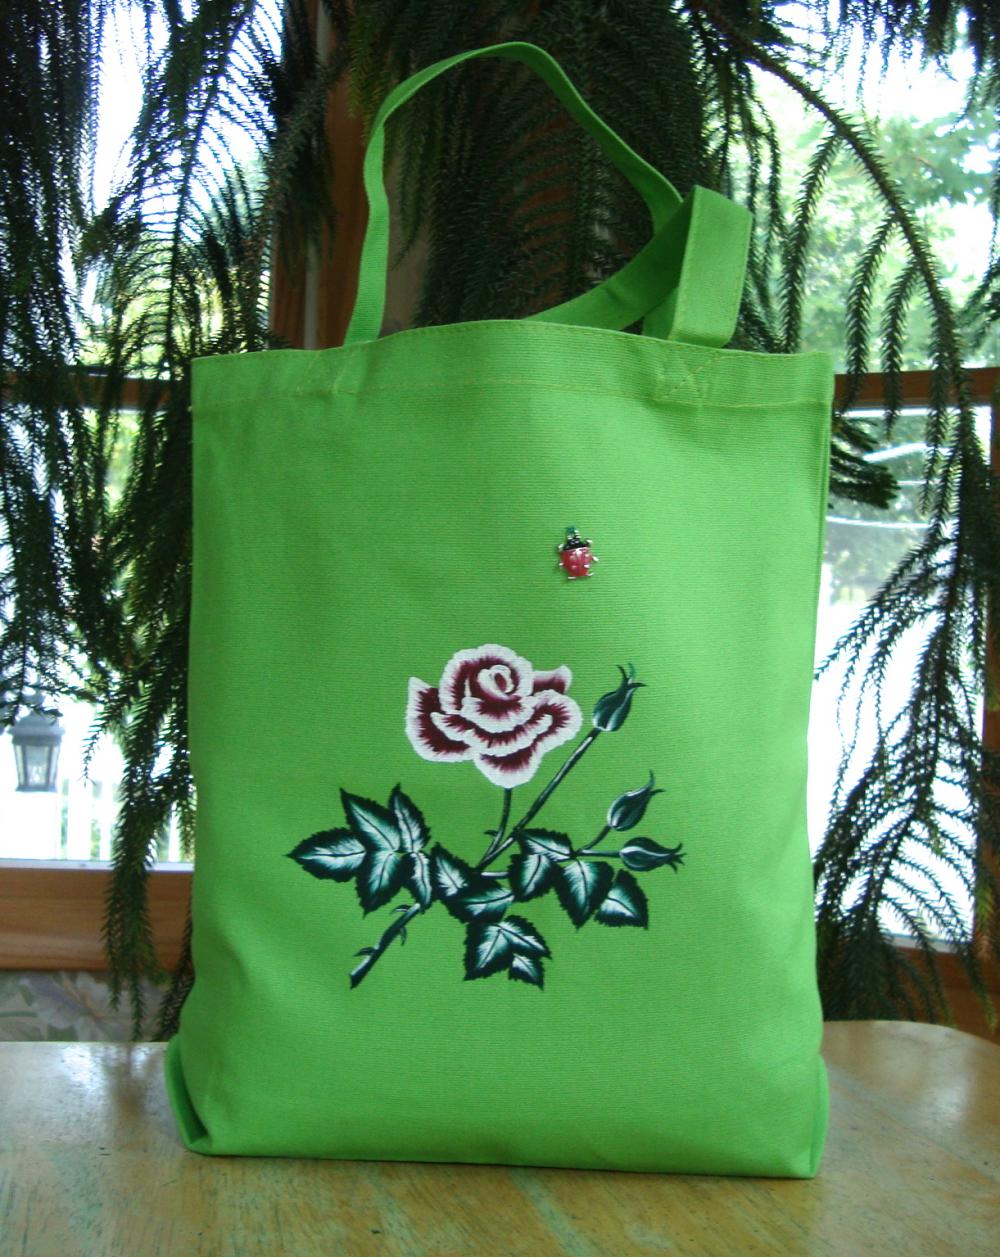 Green Tote Bag With Red Rose And A Ladybug